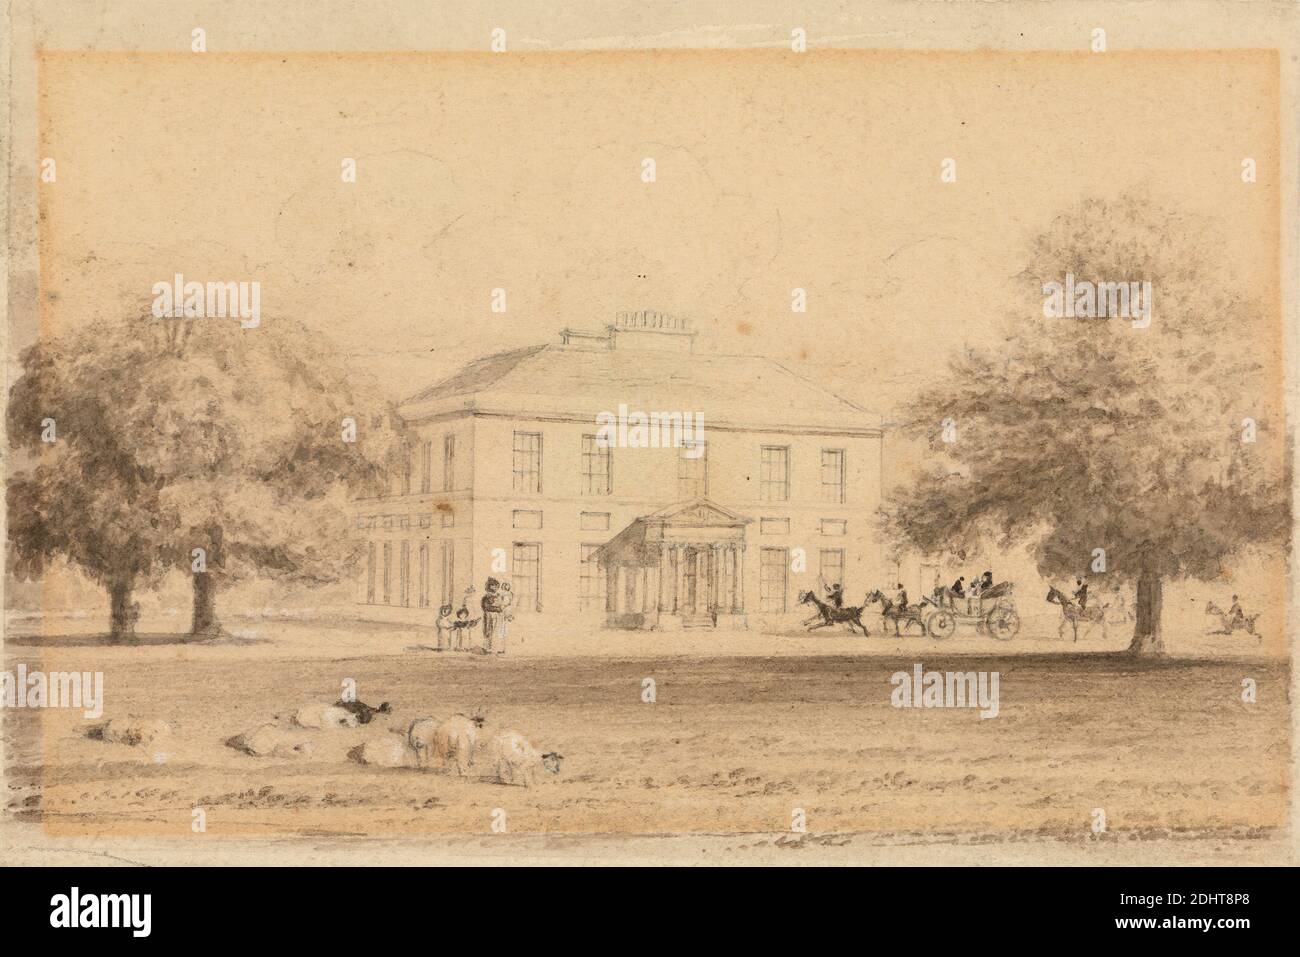 Gaunt's House, Wimborne, John Preston Neale, 1771/80–1847, British, undated, Pen and black ink, brown wash and graphite on medium, slightly textured, cream wove paper mounted on very thick, smooth, cream wove paper, Sheet: 3 7/16 × 5 1/8 inches (8.7 × 13 cm), architectural subject, carriage, chimneys, columns, country house, horses (animals), oaks, park (grounds), pediment, people, sheep, trees, windows, Dorset, England, Europe, United Kingdom, Wimborne Stock Photo